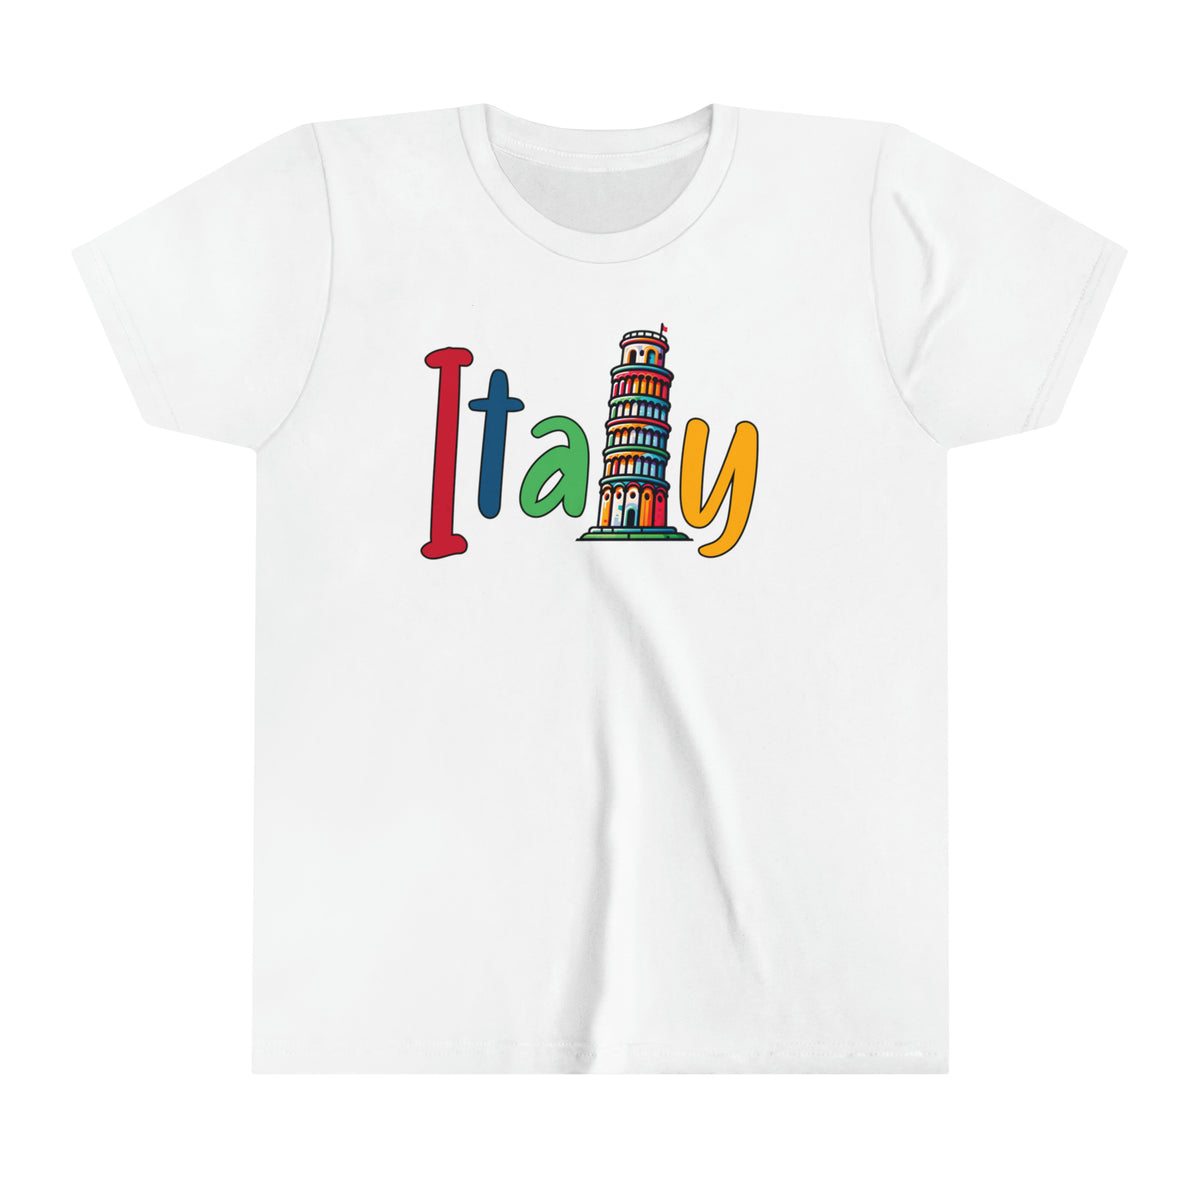 Cute Italy Trip shirt | Italy Vacation Shirt | World Traveler Italian Gift | Leaning Tower of Pisa | Super Soft Youth Jersey T-shirt